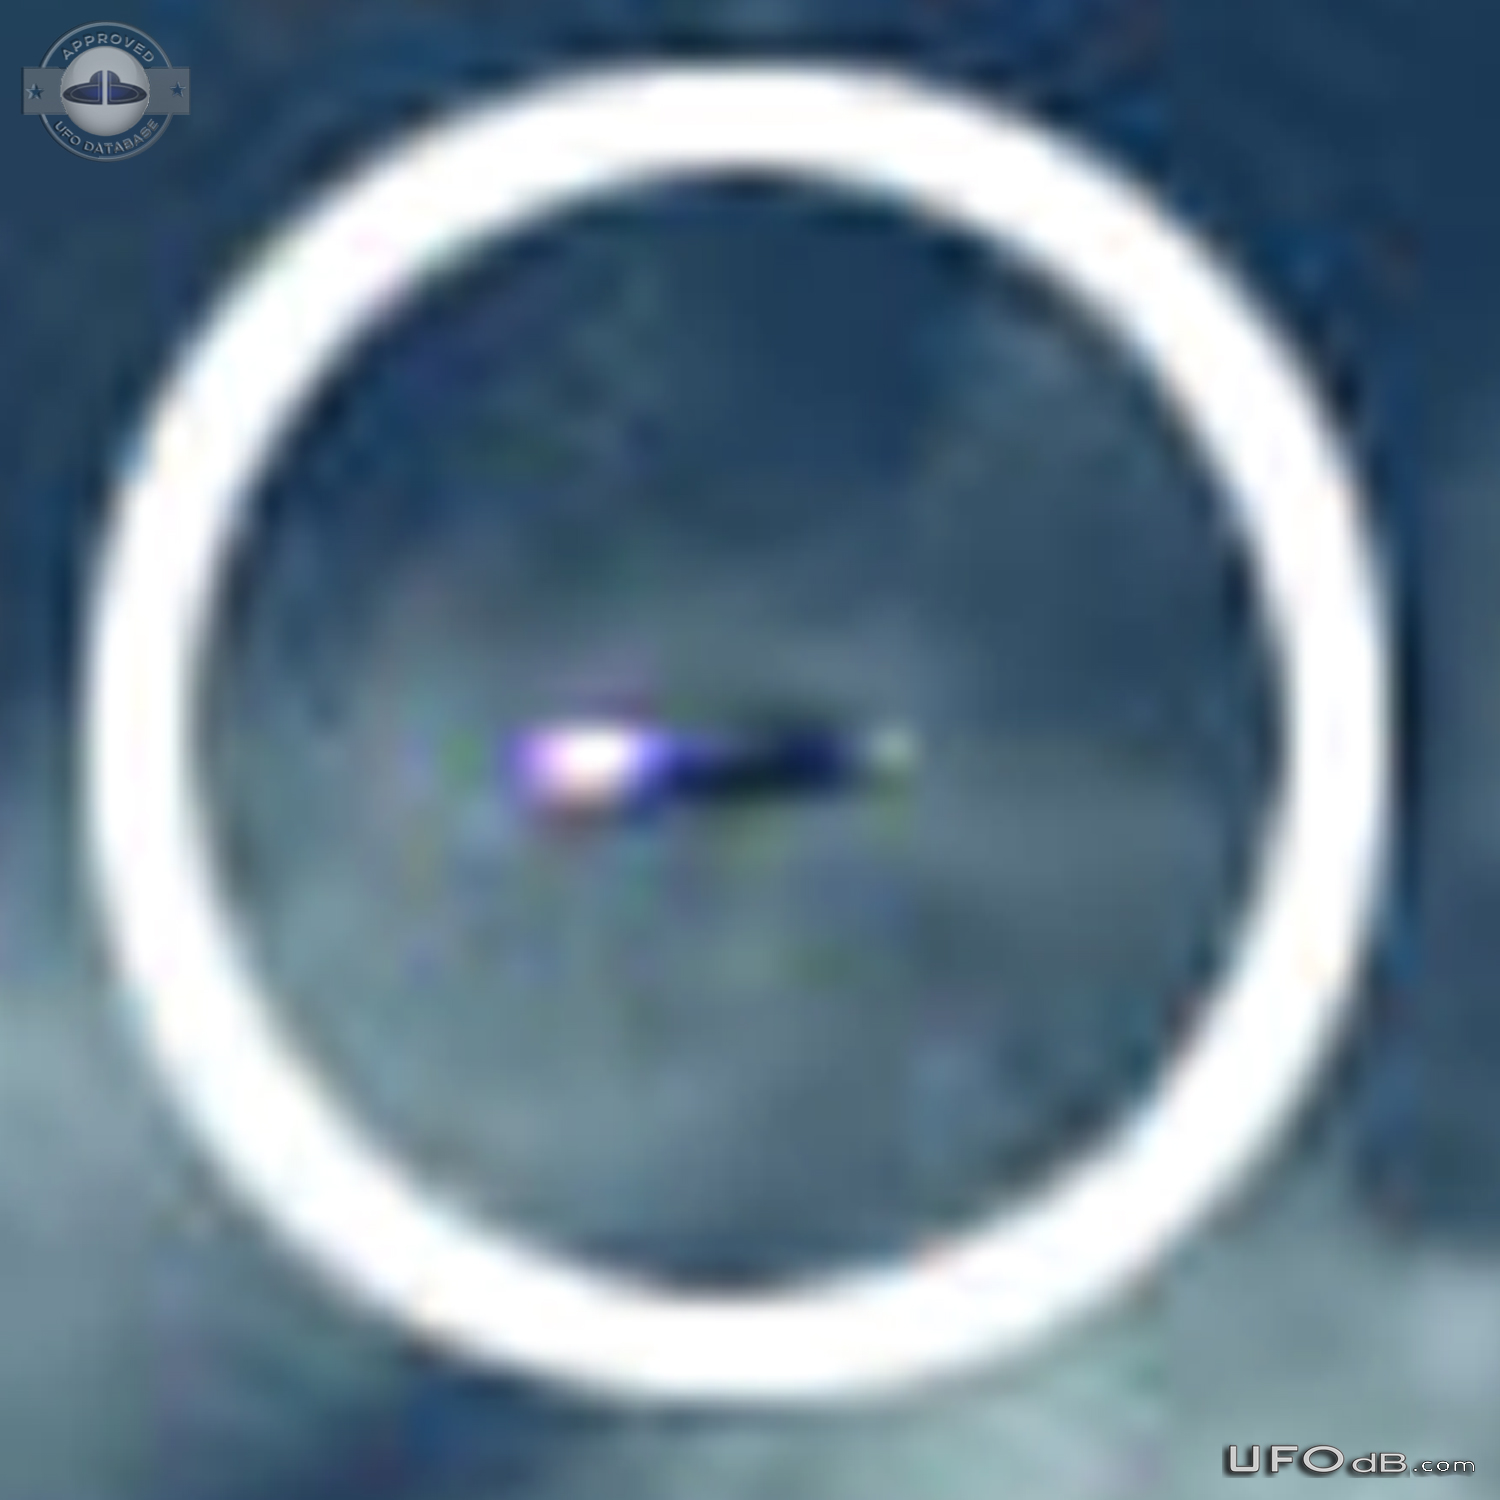 Trail Camera Captures UFOs in the Eastern Sky - Clancy Montana USA 201 UFO Picture #765-6